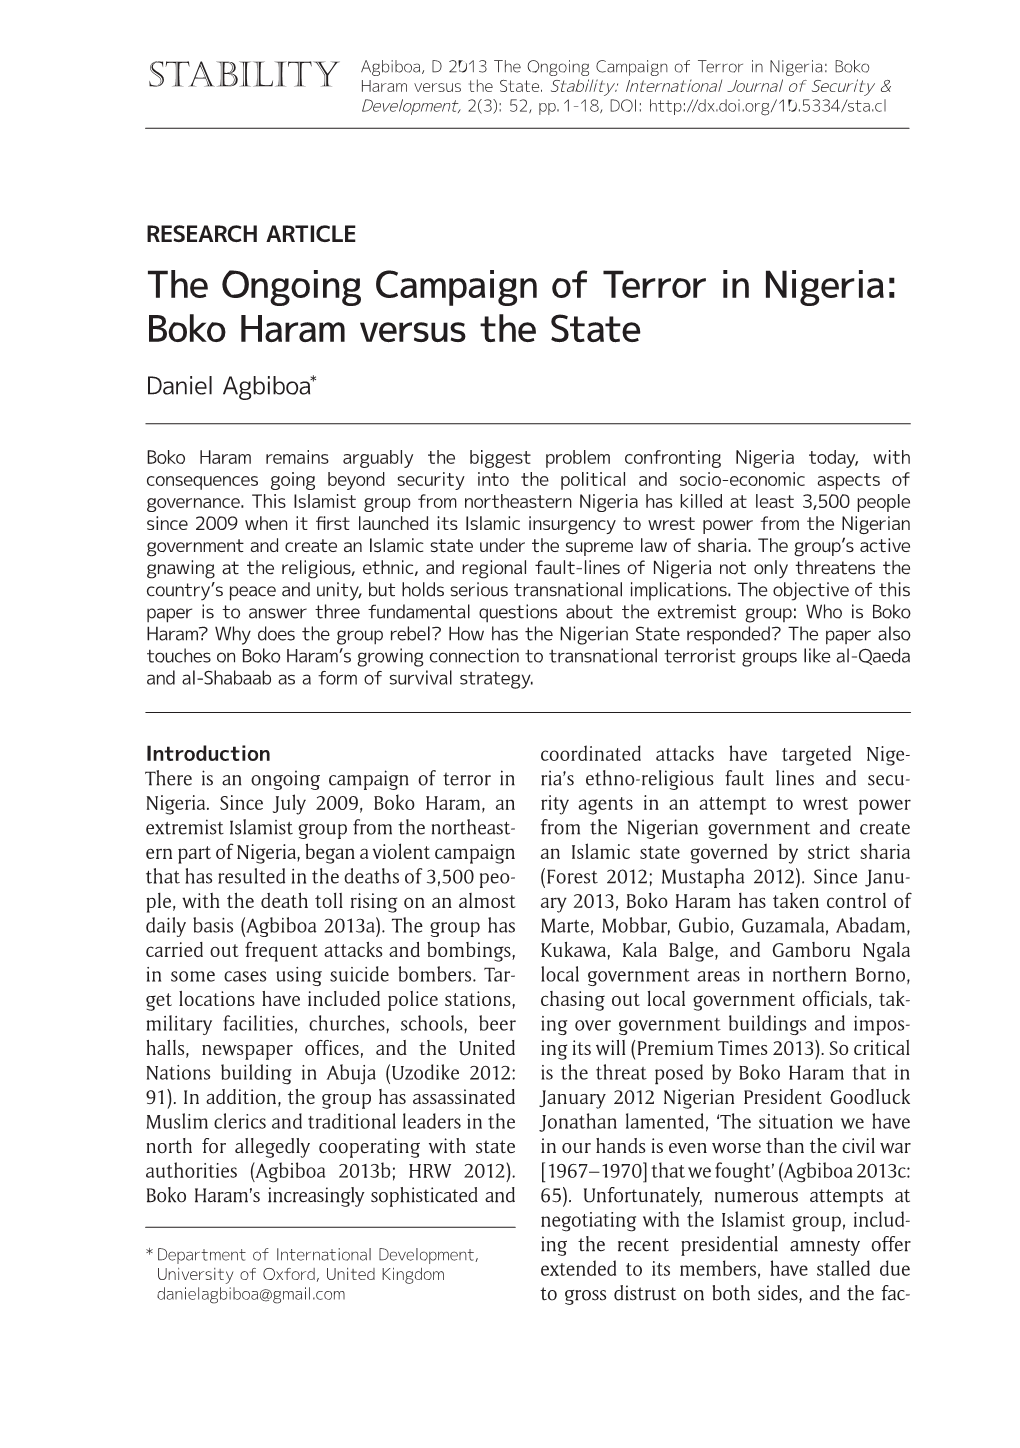 The Ongoing Campaign of Terror in Nigeria: Boko Haram Versus the State Daniel Agbiboa*